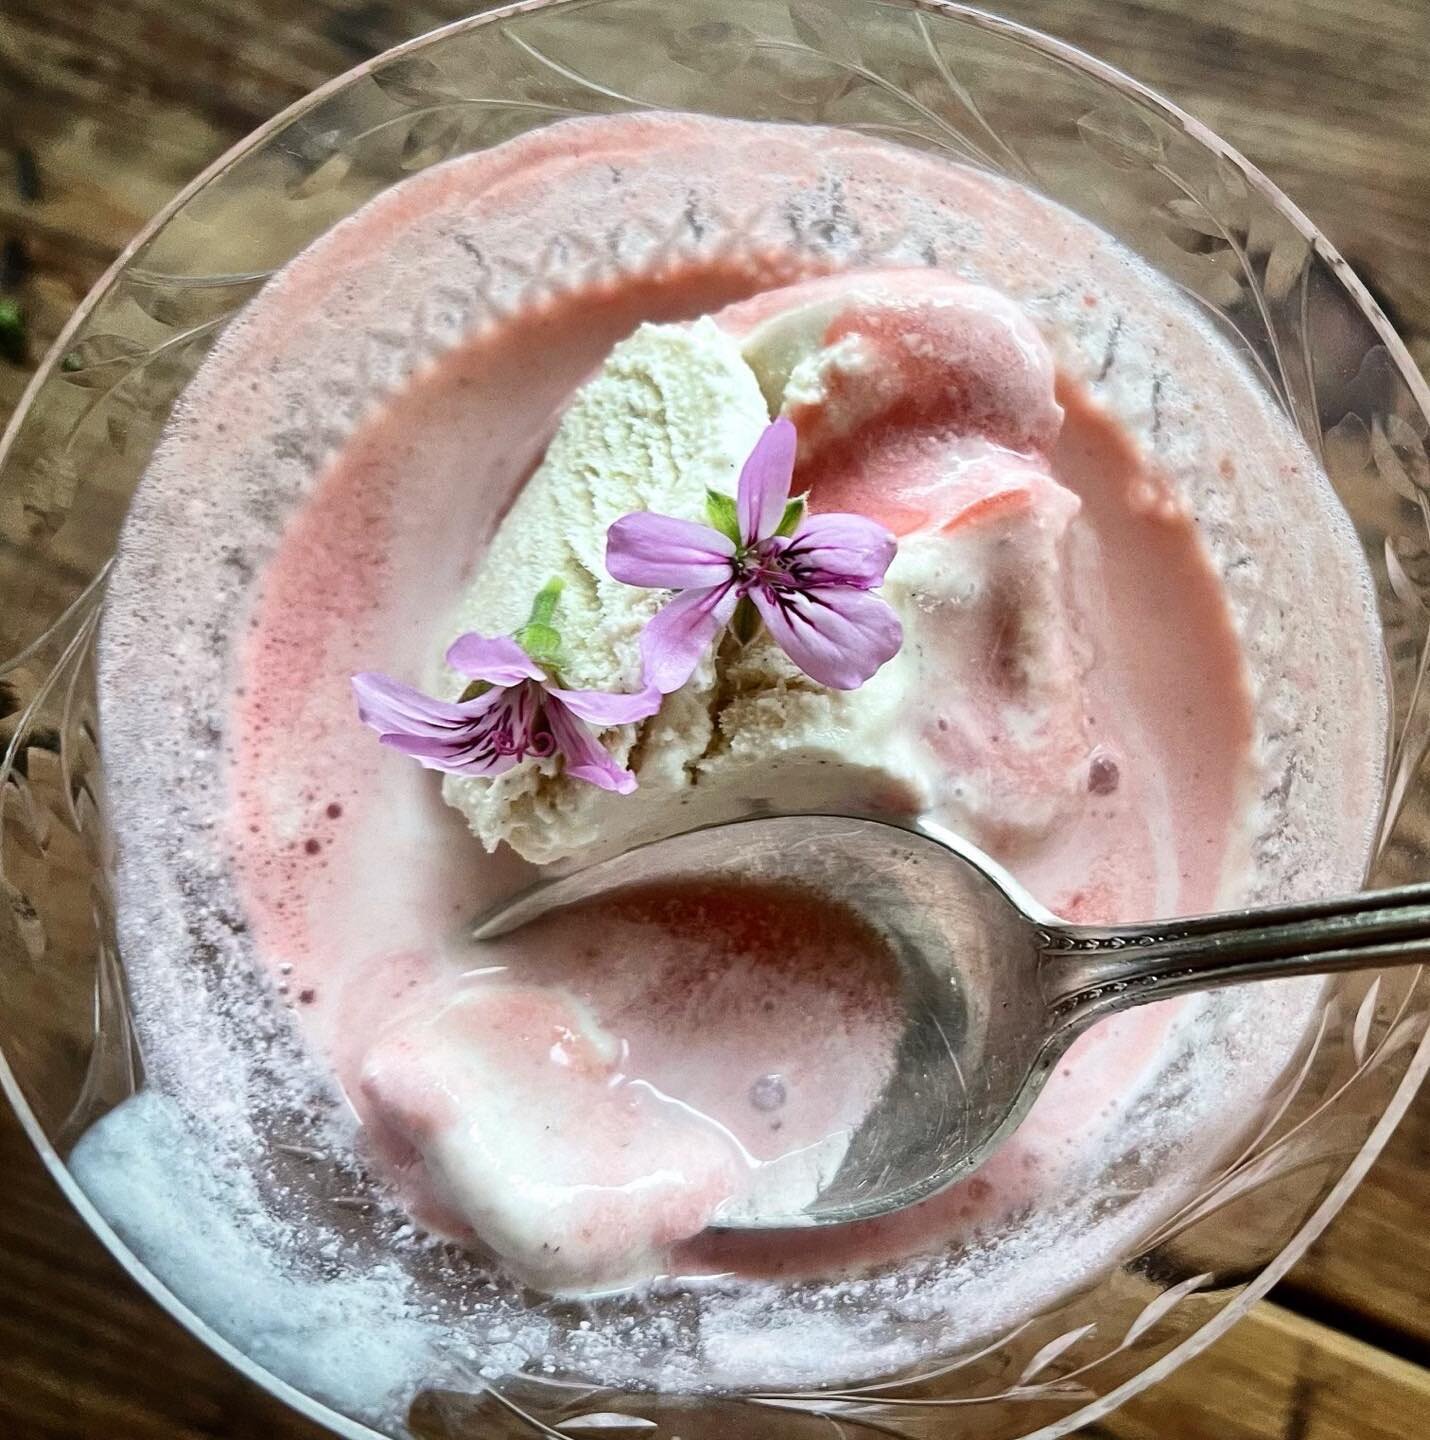 a sure indication that life is good: summer evening, soda floats, wonderful neighbors. This gorgeous delight features our **wild fermented strawberry and rose geranium soda from the weekend markets,  poured over Strauss vanilla ice cream in family he